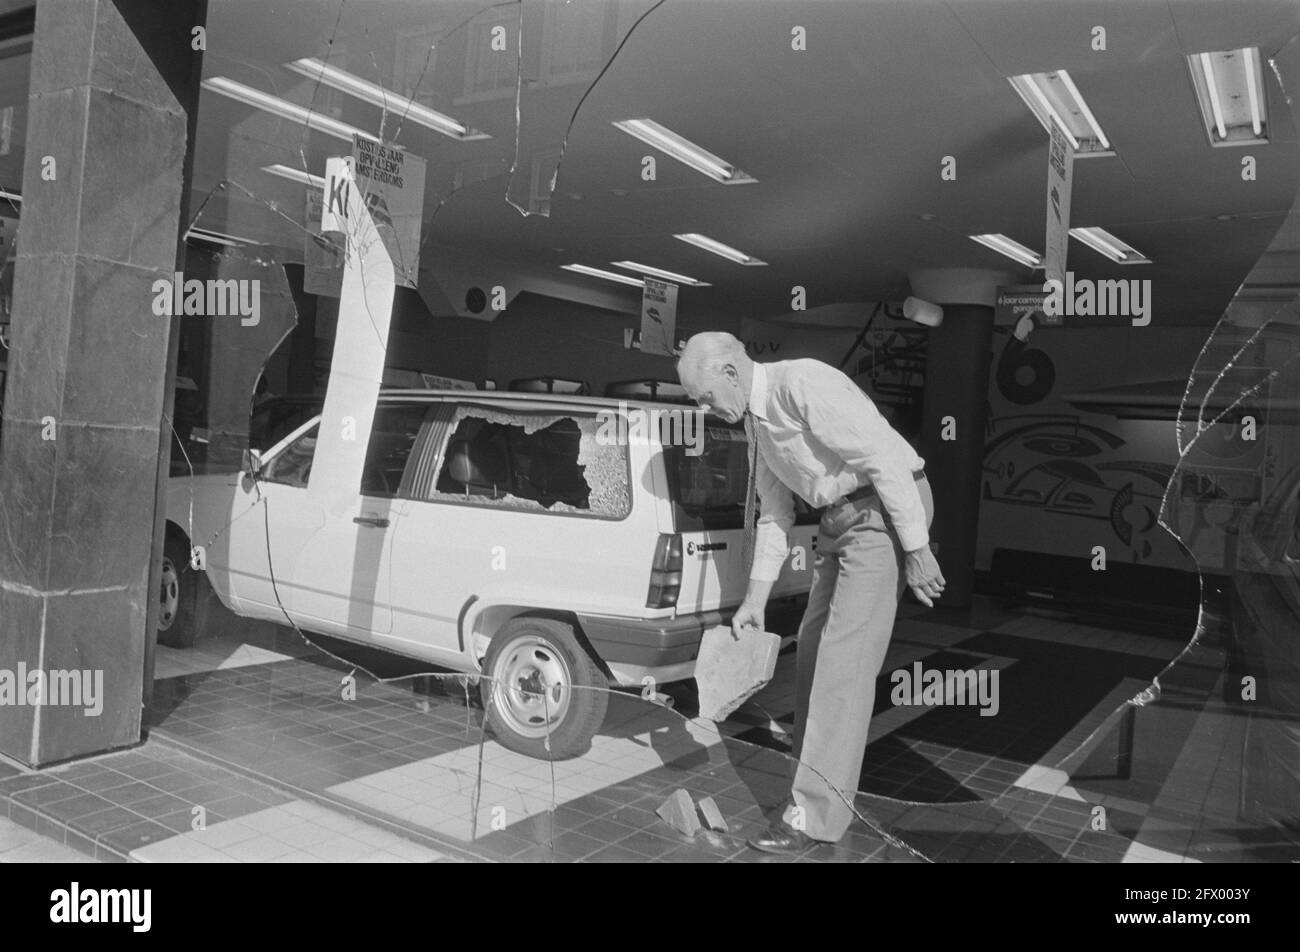 Windows of Volkswagen dealer smashed in protest against VW investments in South Africa; owner Kost with brick at broken window, 12 August 1985, WINDOWS, cars, bricks, protests, The Netherlands, 20th century press agency photo, news to remember, documentary, historic photography 1945-1990, visual stories, human history of the Twentieth Century, capturing moments in time Stock Photo